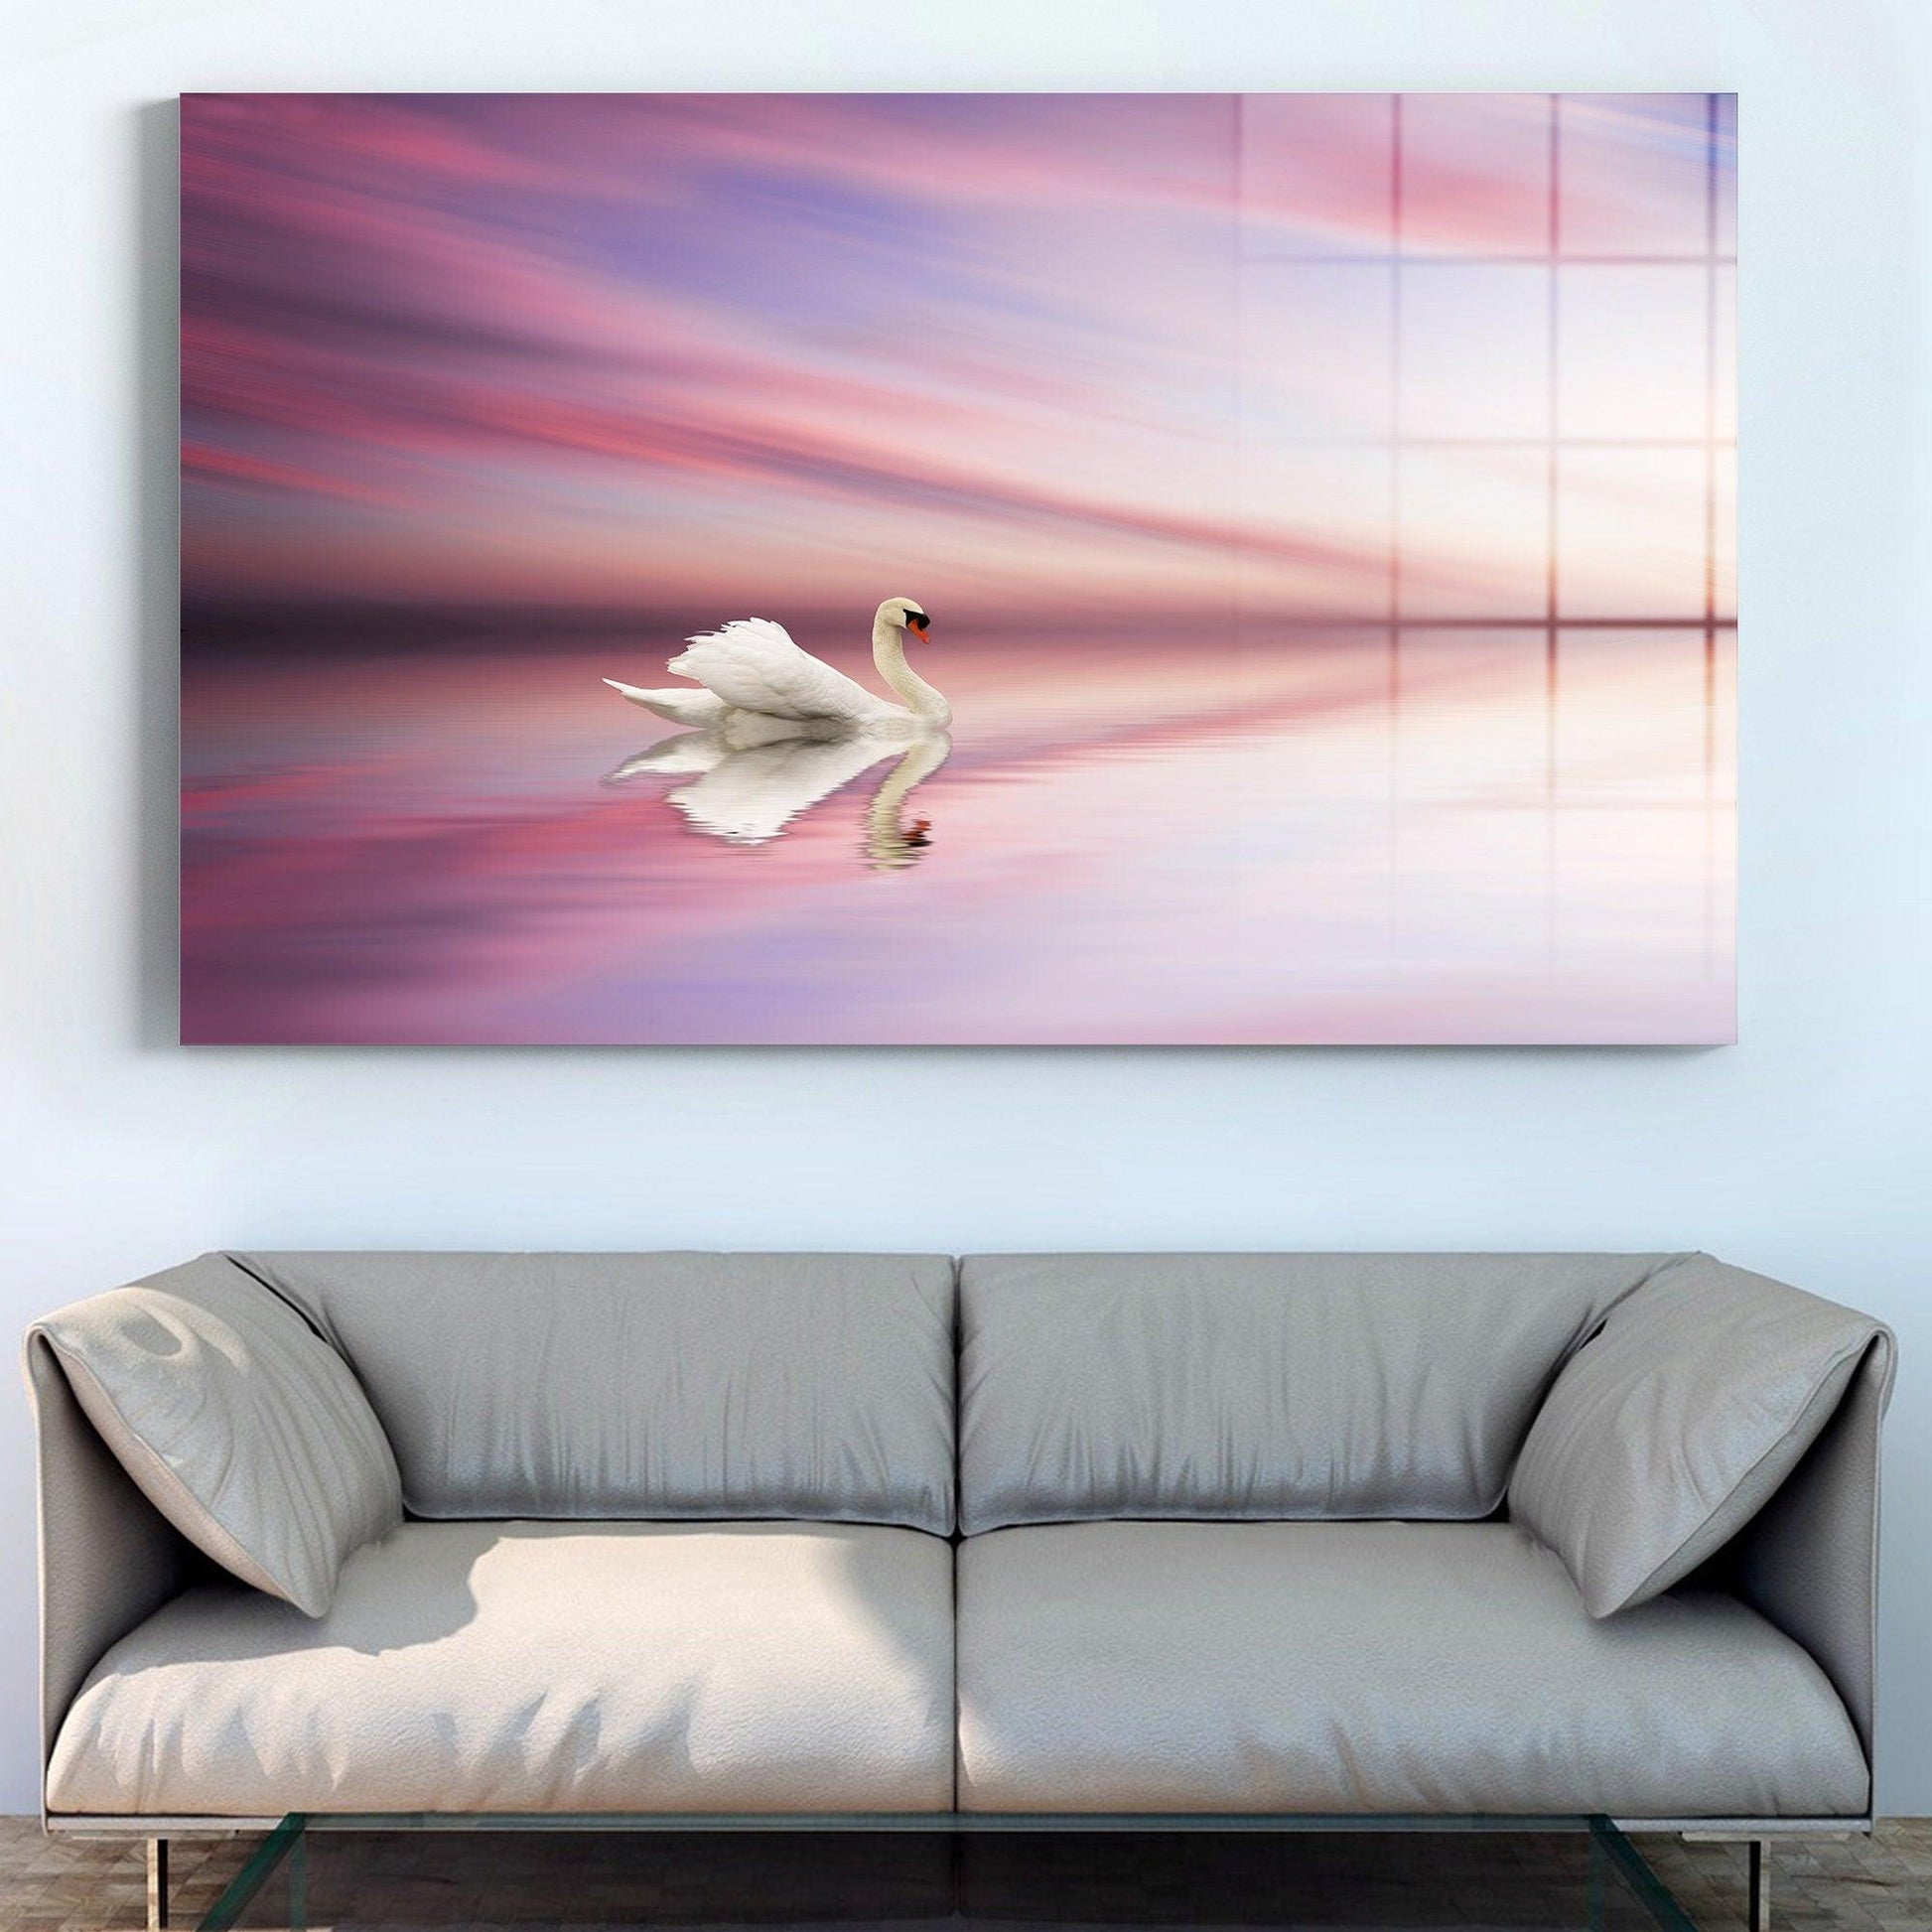 Home Decoration Glass Wall Art| Oversized office Wall Decor, Fractal And Cool Wall Hanging, Swan canvas Wall Art, Swan Lake View Wall Art